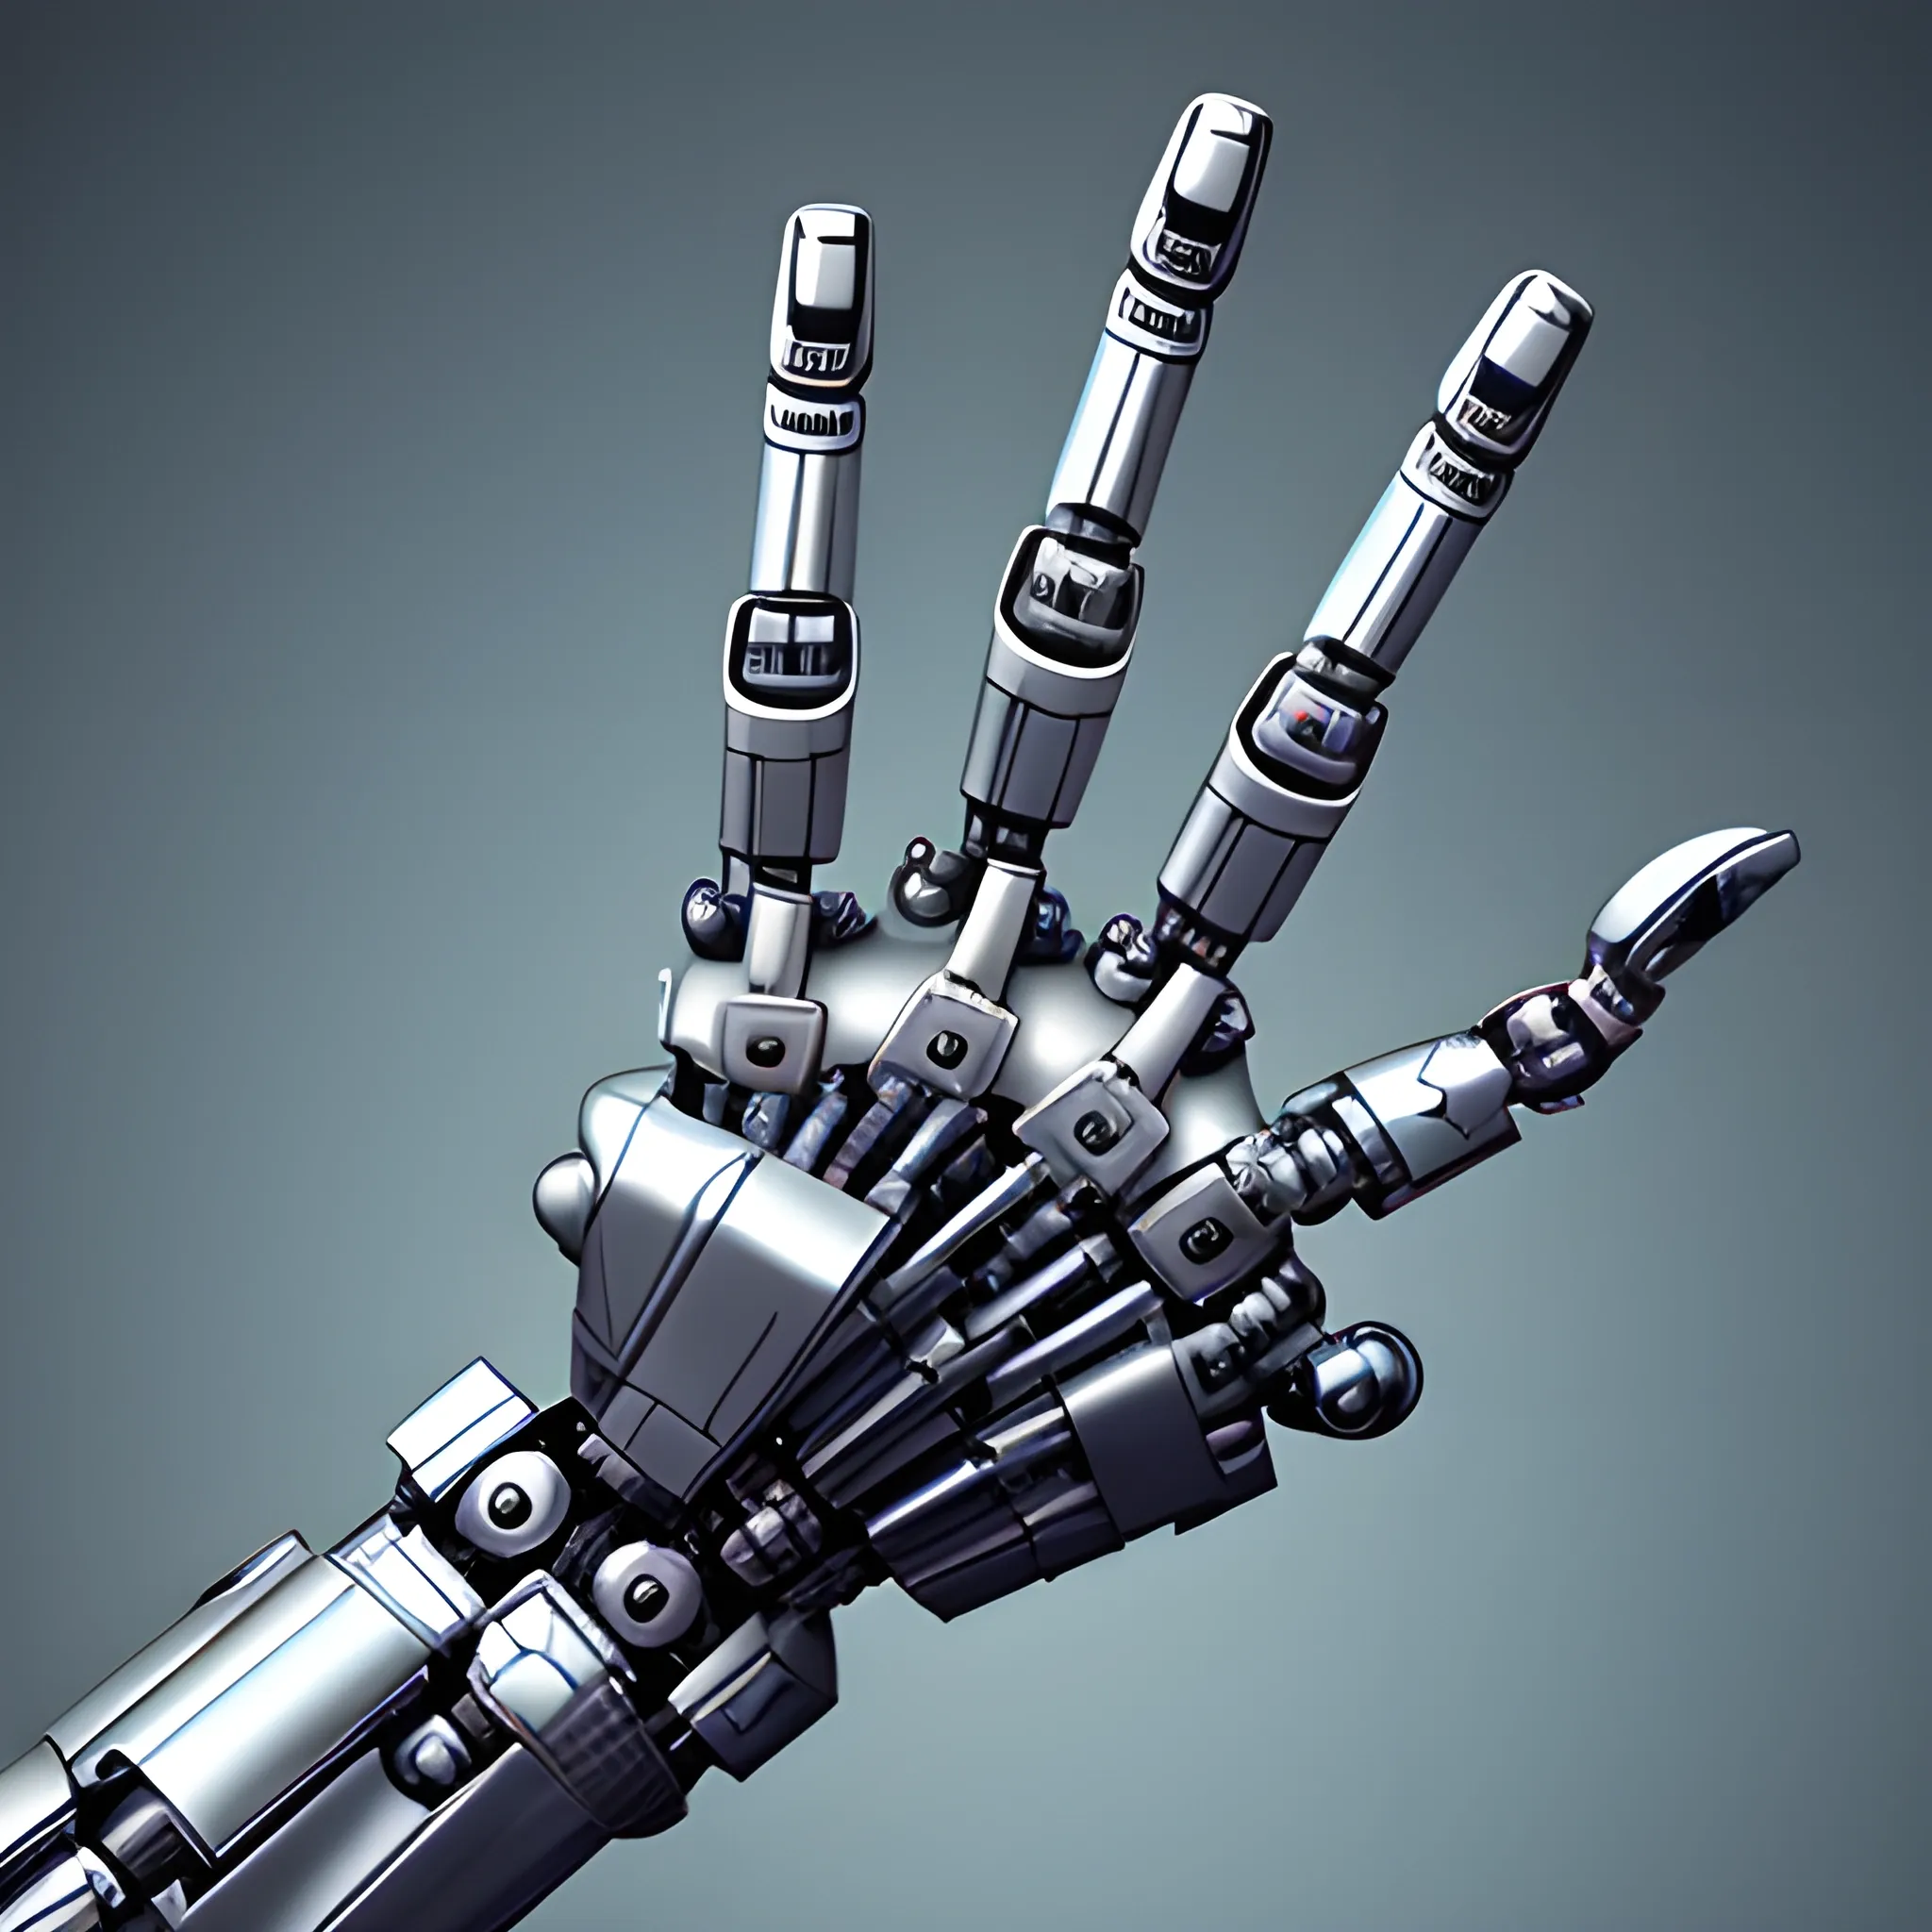 A Robot hand, in like pose